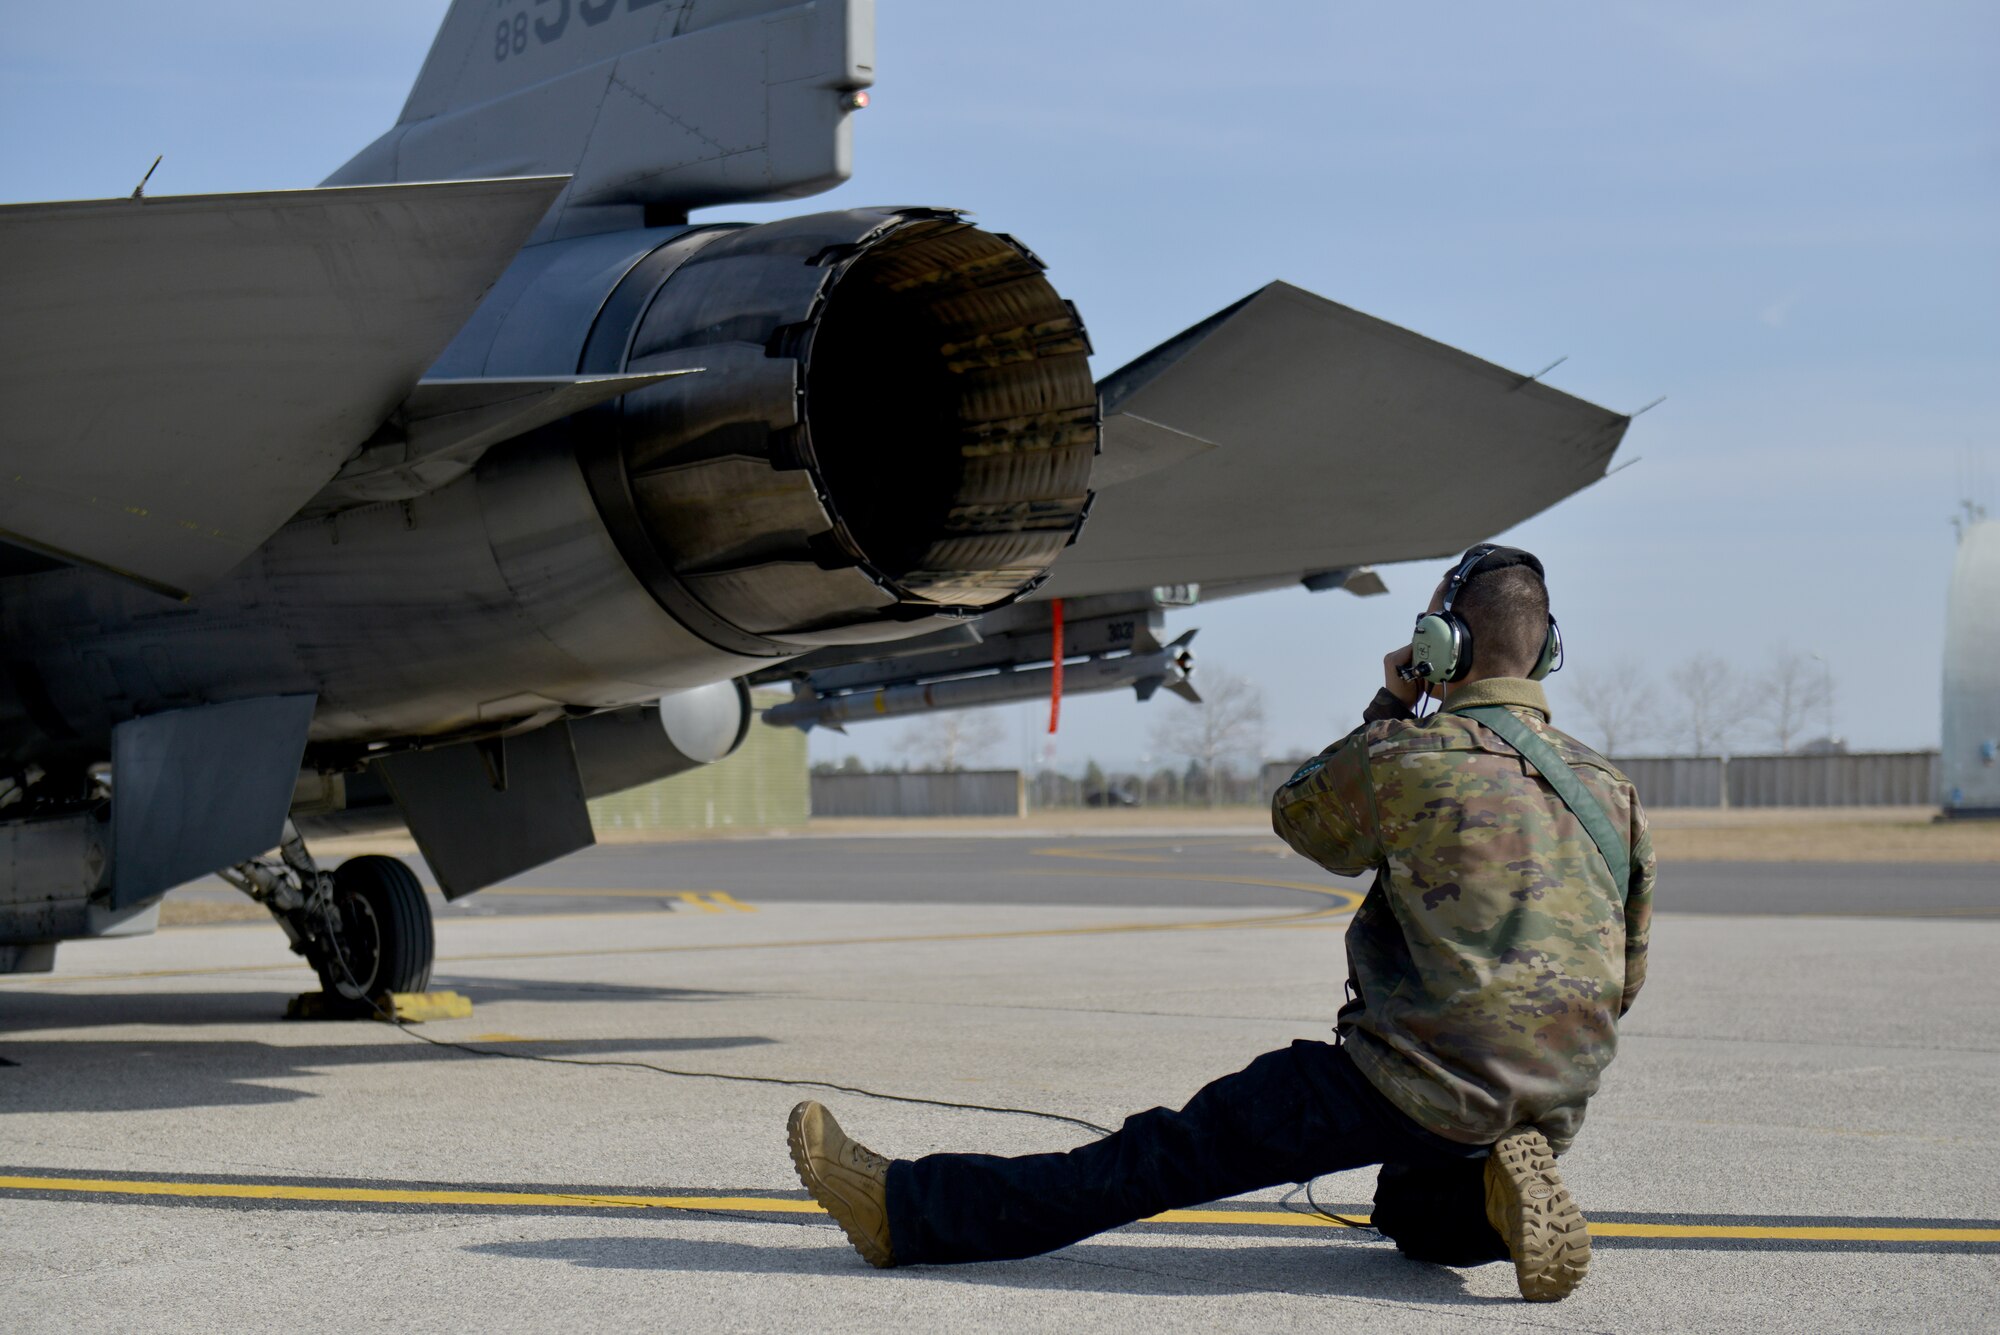 U.S. Air Force Airman 1st Class Jacob Wood, 31st Aircraft Maintenance Squadron assistant dedicated crew chief, checks flight control movement on an F-16 Fighting Falcon aircraft assigned to the 555th Fighter Squadron at Aviano Air Base, Italy, Feb. 25, 2022. The flight will support NATO’s enhanced air policing mission; integrate with allies and partners in the Black Sea region in an increased defensive posture along NATO’s border and to reinforce regional security. (U.S. Air Force photo by Natalie Stanley)